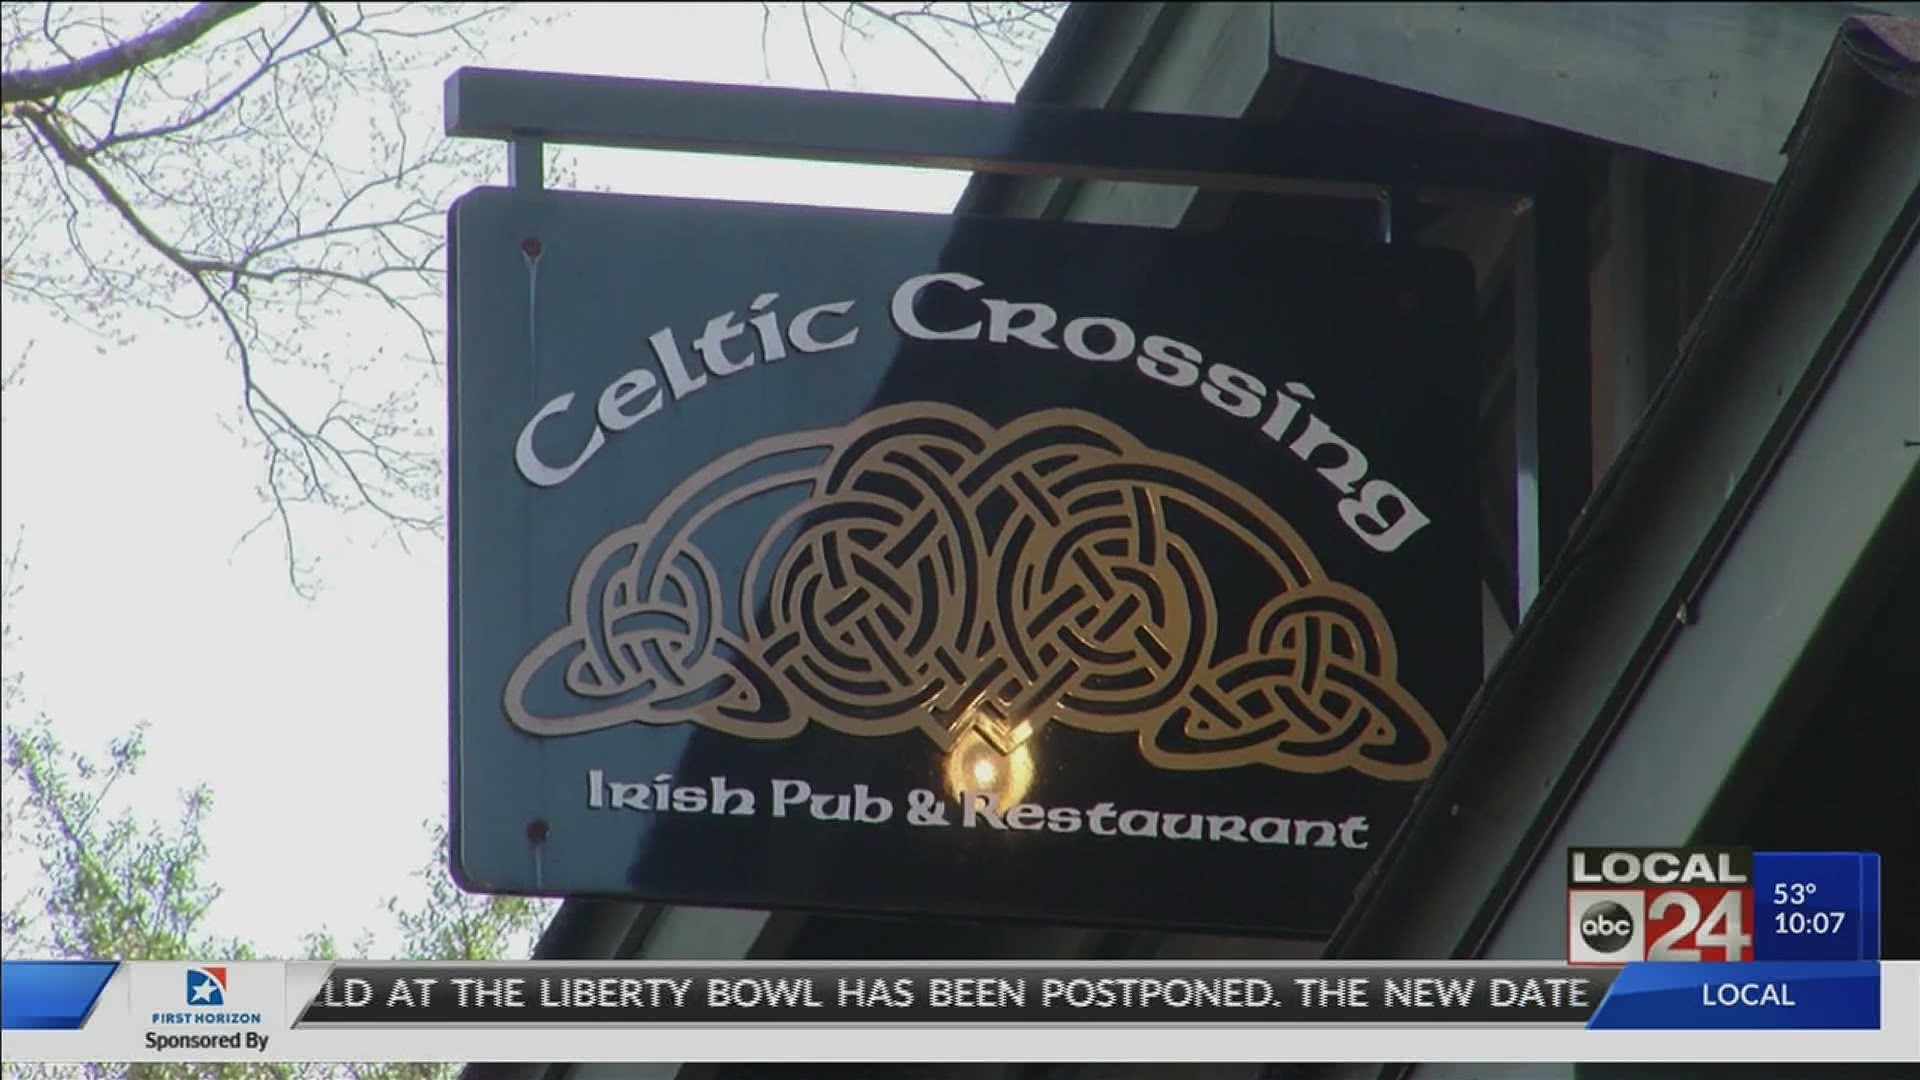 Celtic Crossing, which took extra health precautions, had a good turnout for its annual celebration